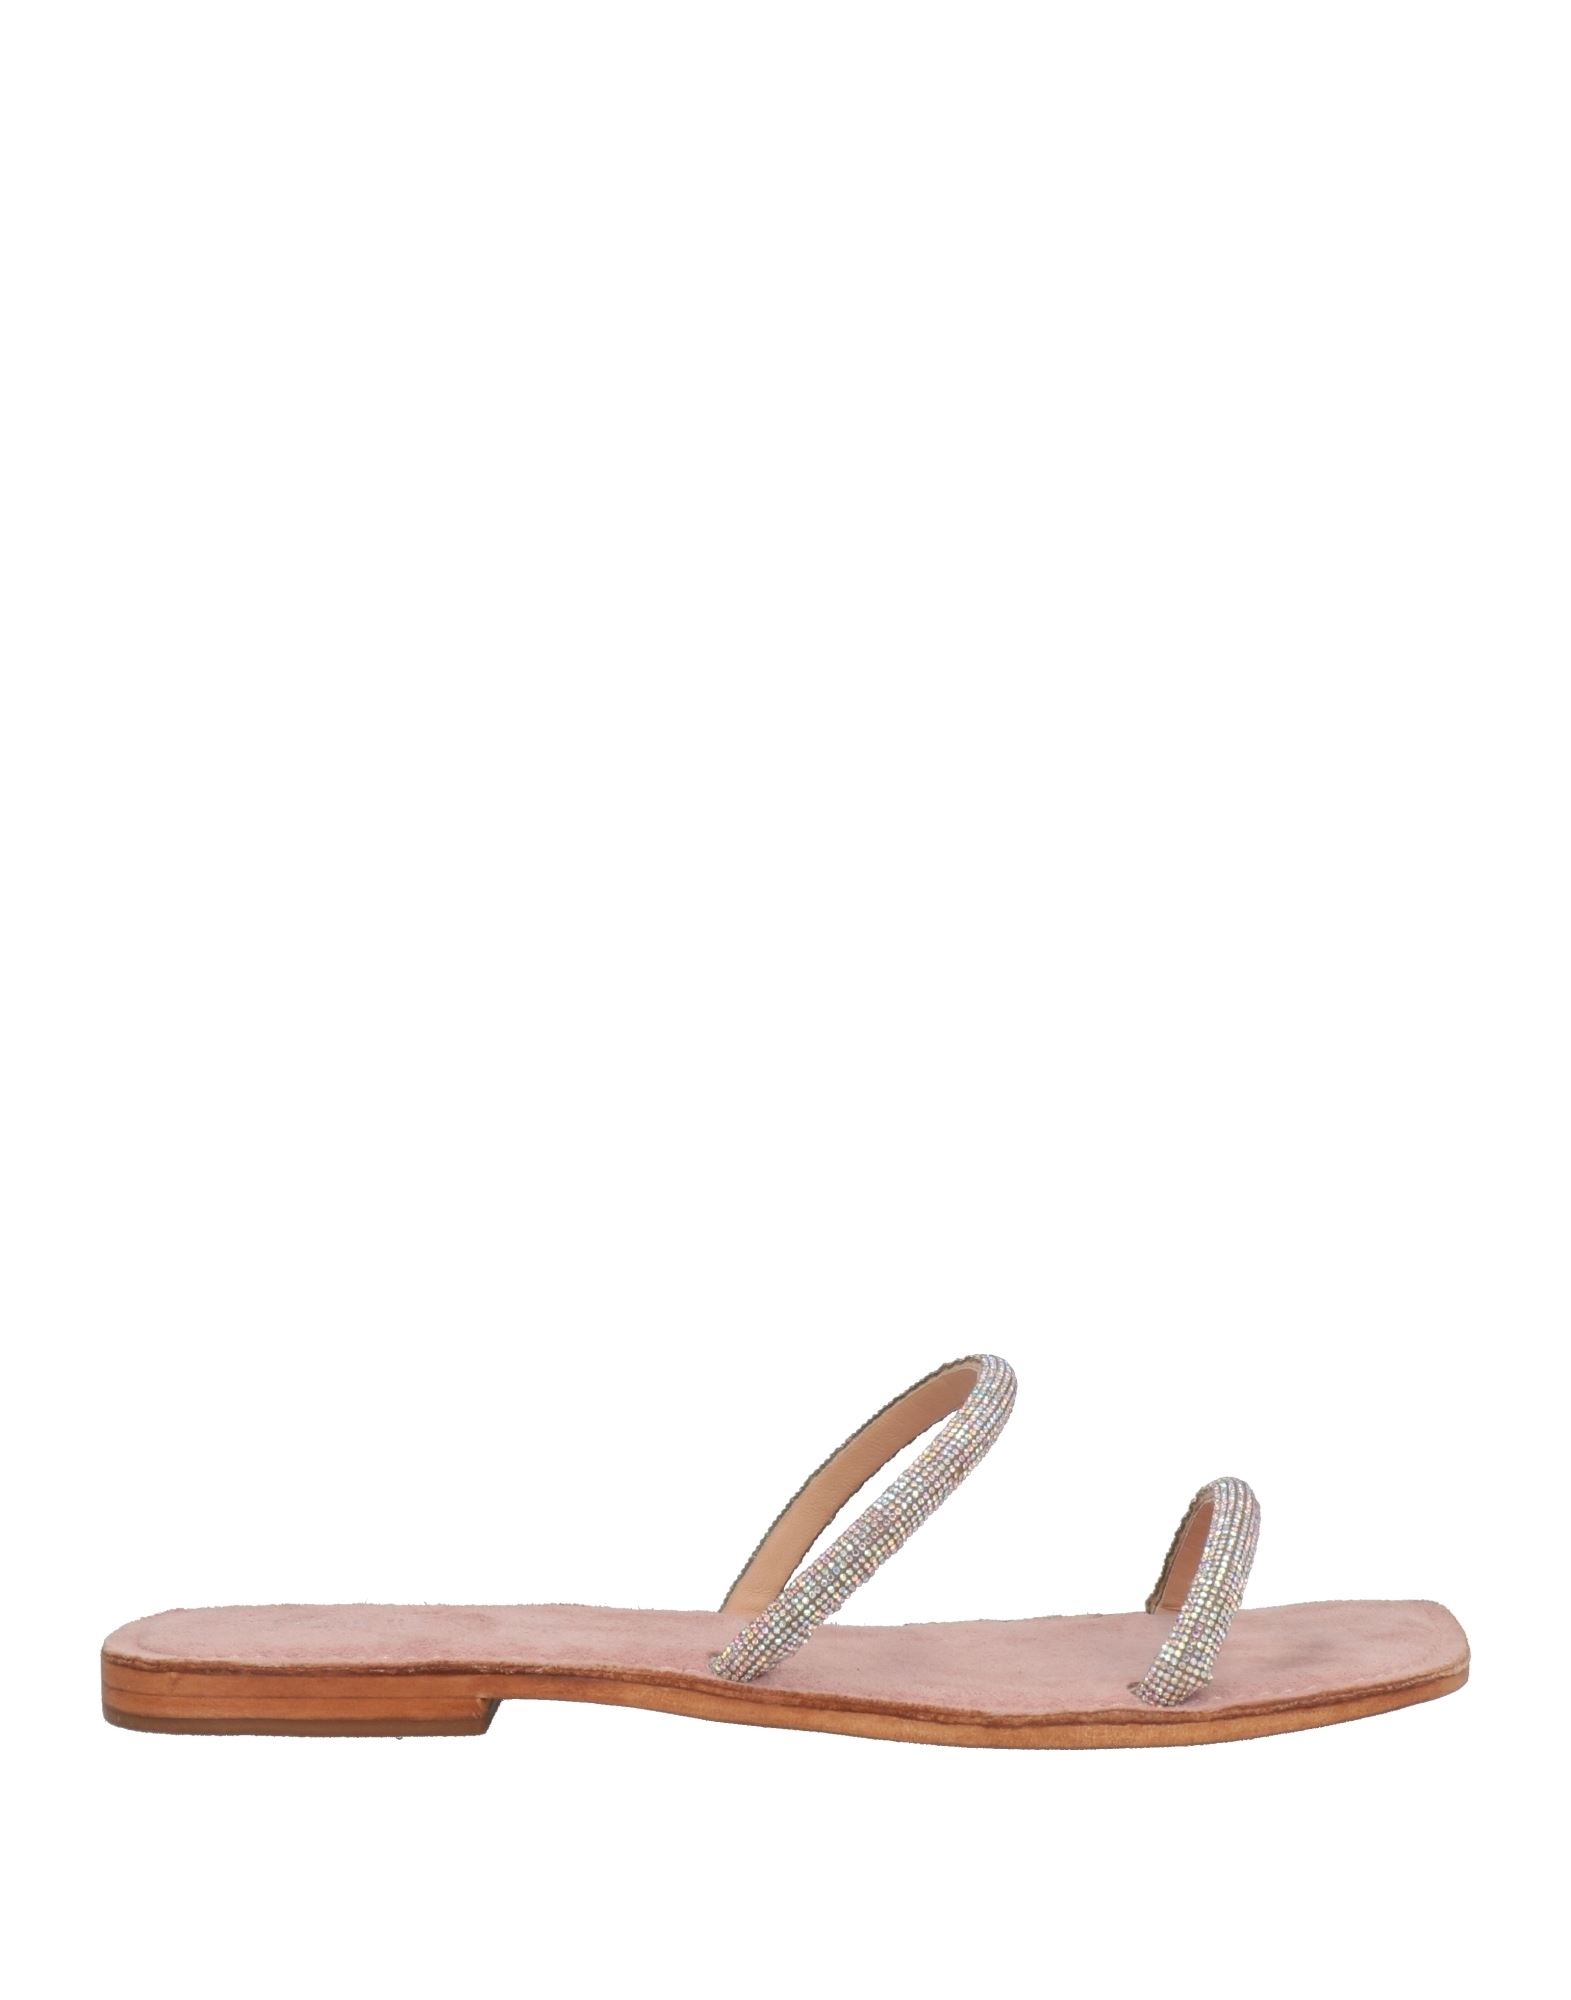 Cb Fusion Sandals In Pink